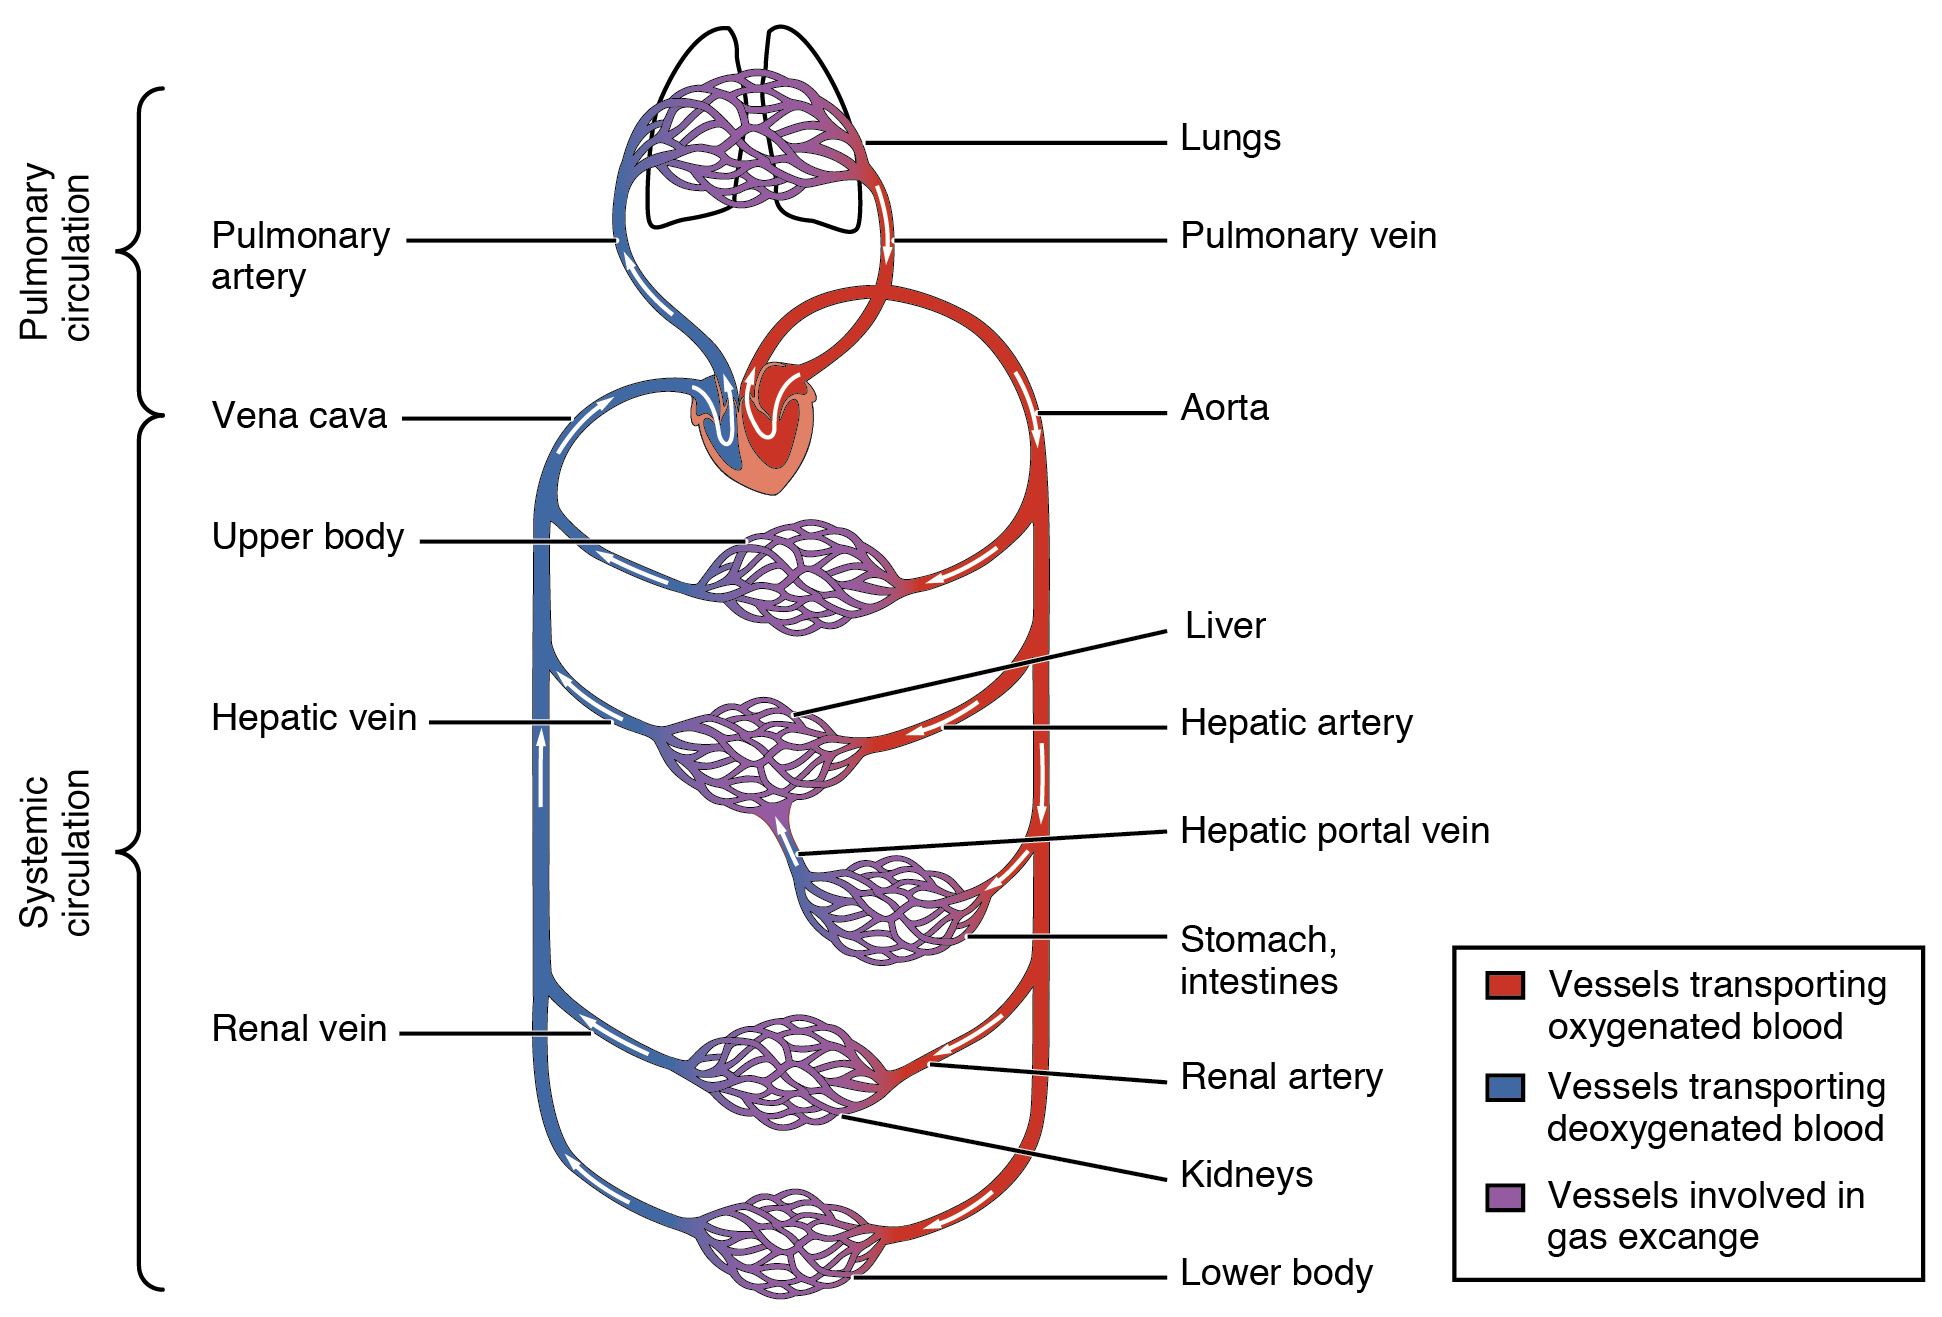 Diagram showing the pulmonary and systemic circulation.